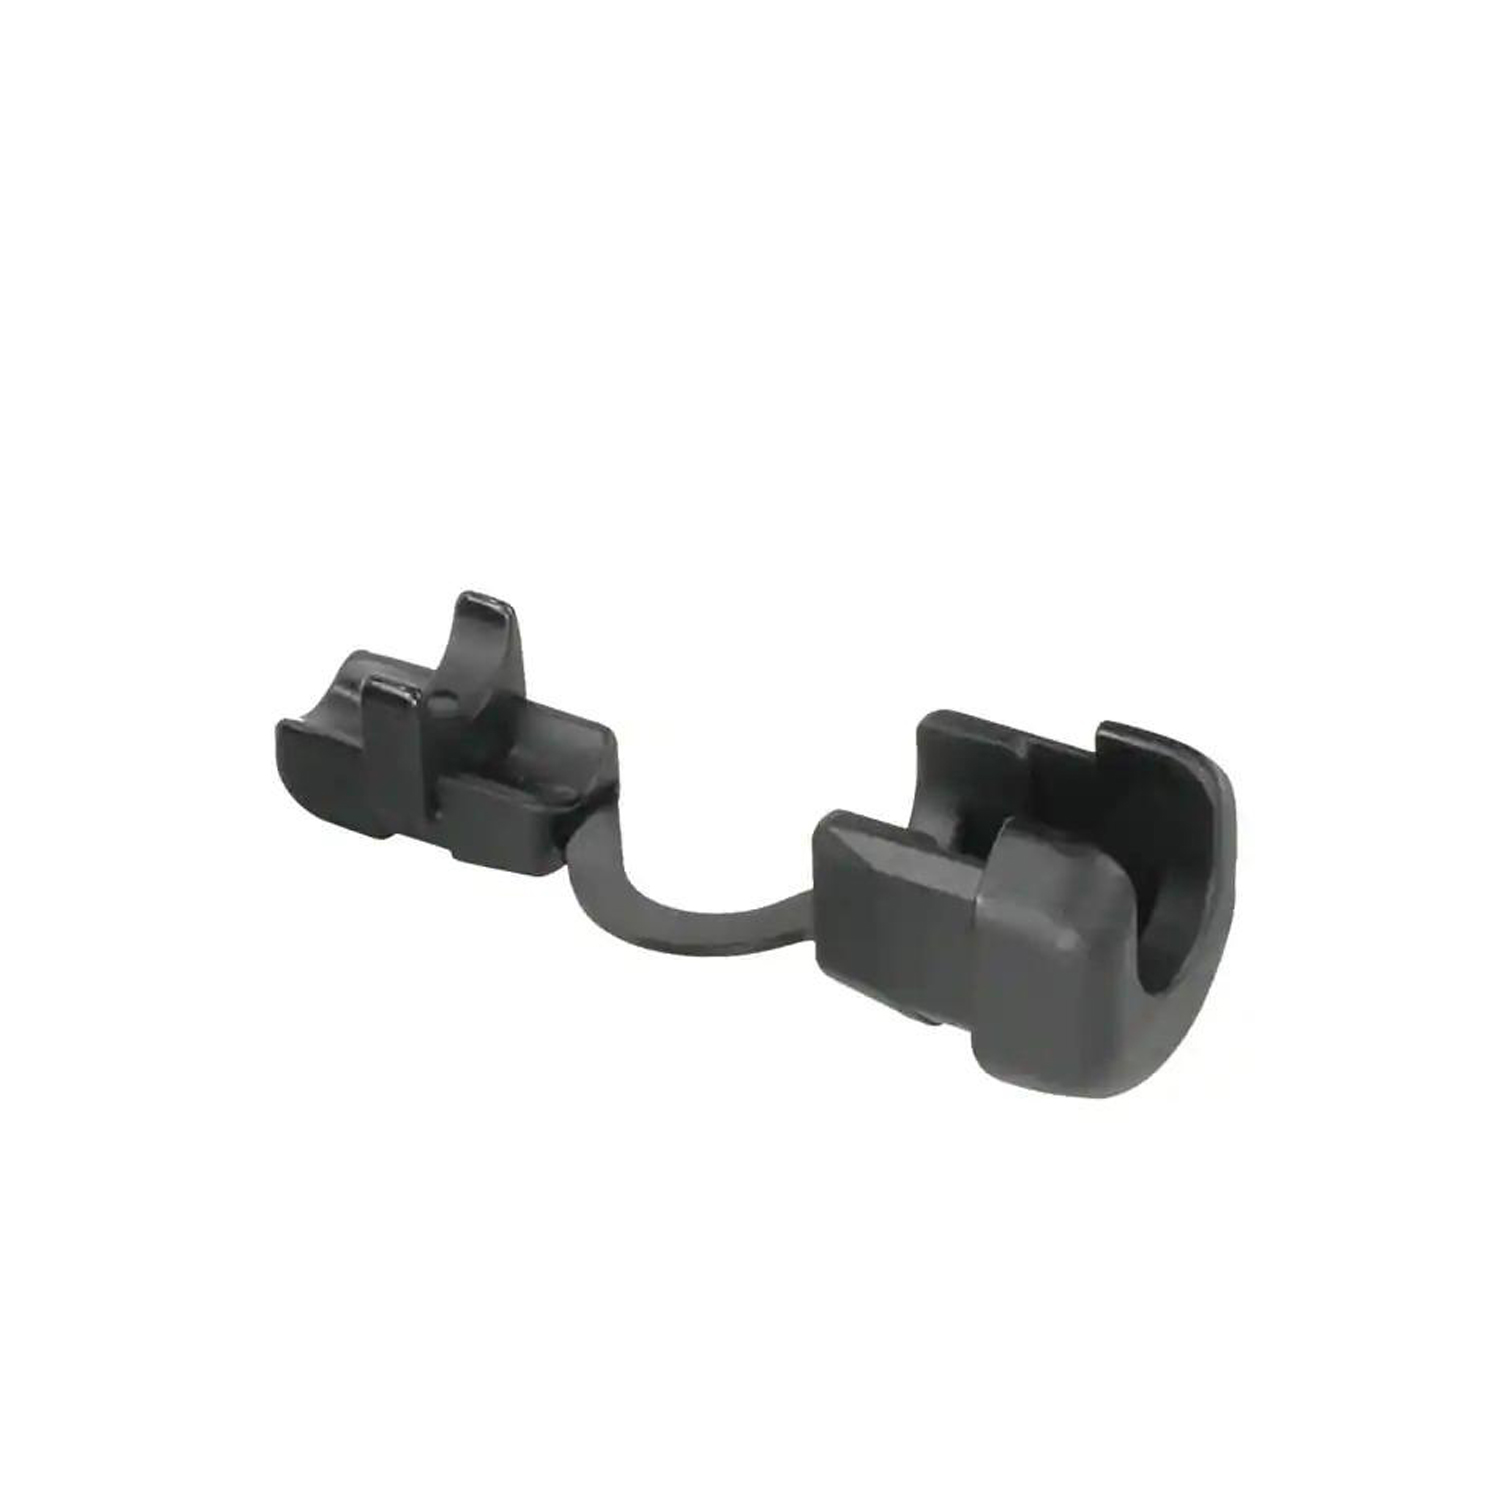 Power Cord Strain Relief for Traeger Pellet Grill-YAOAWE